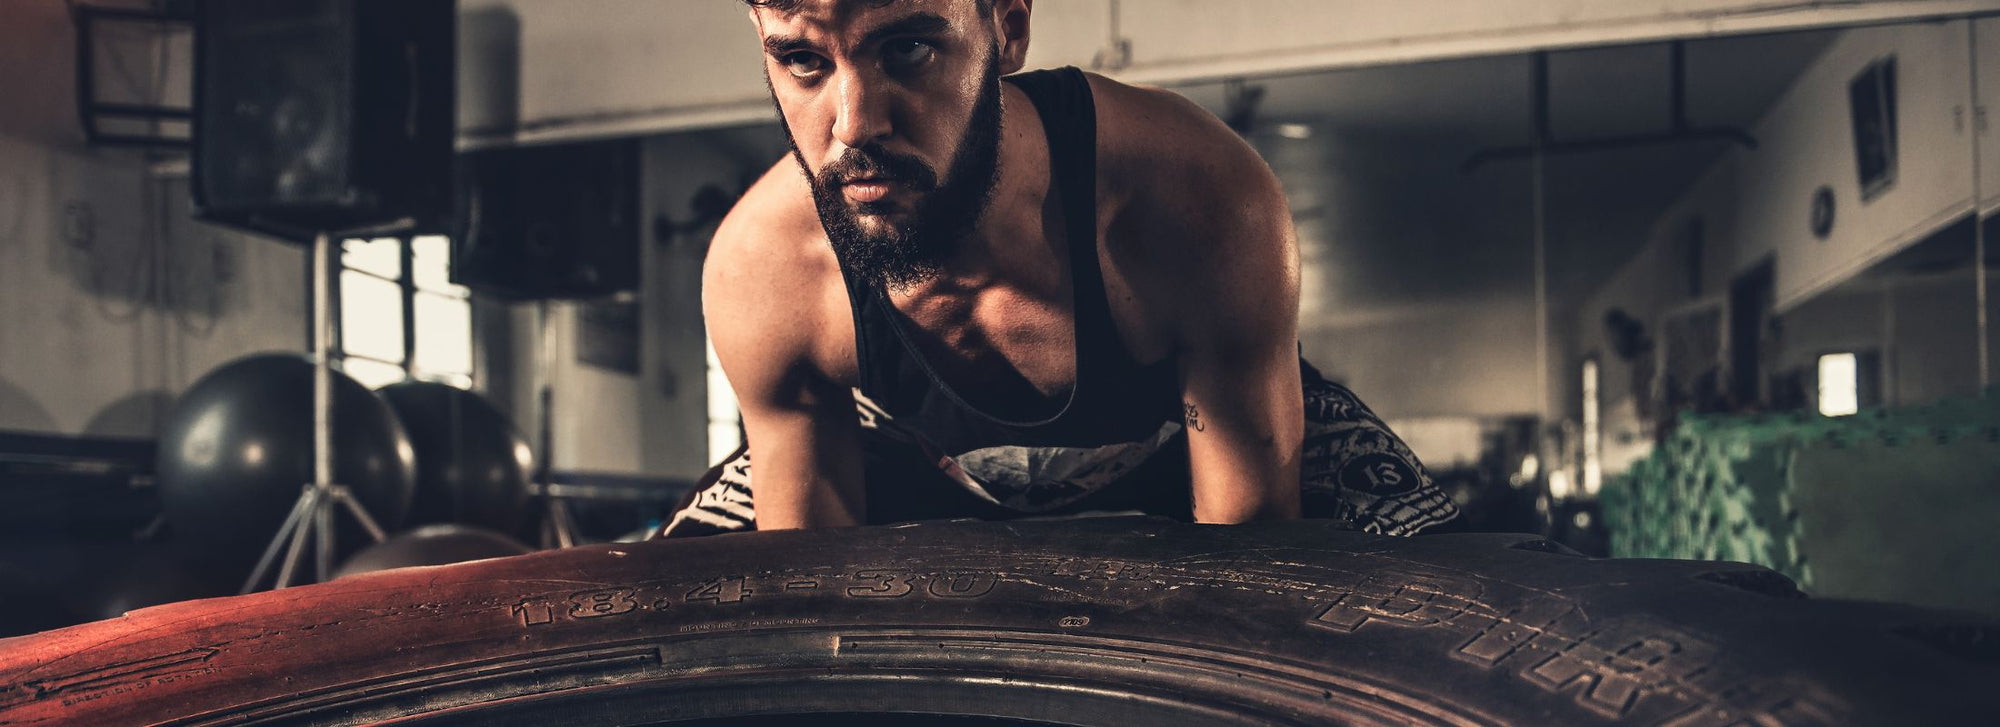 Maximize Muscle Growth: The Ultimate Guide to Progressive Overload